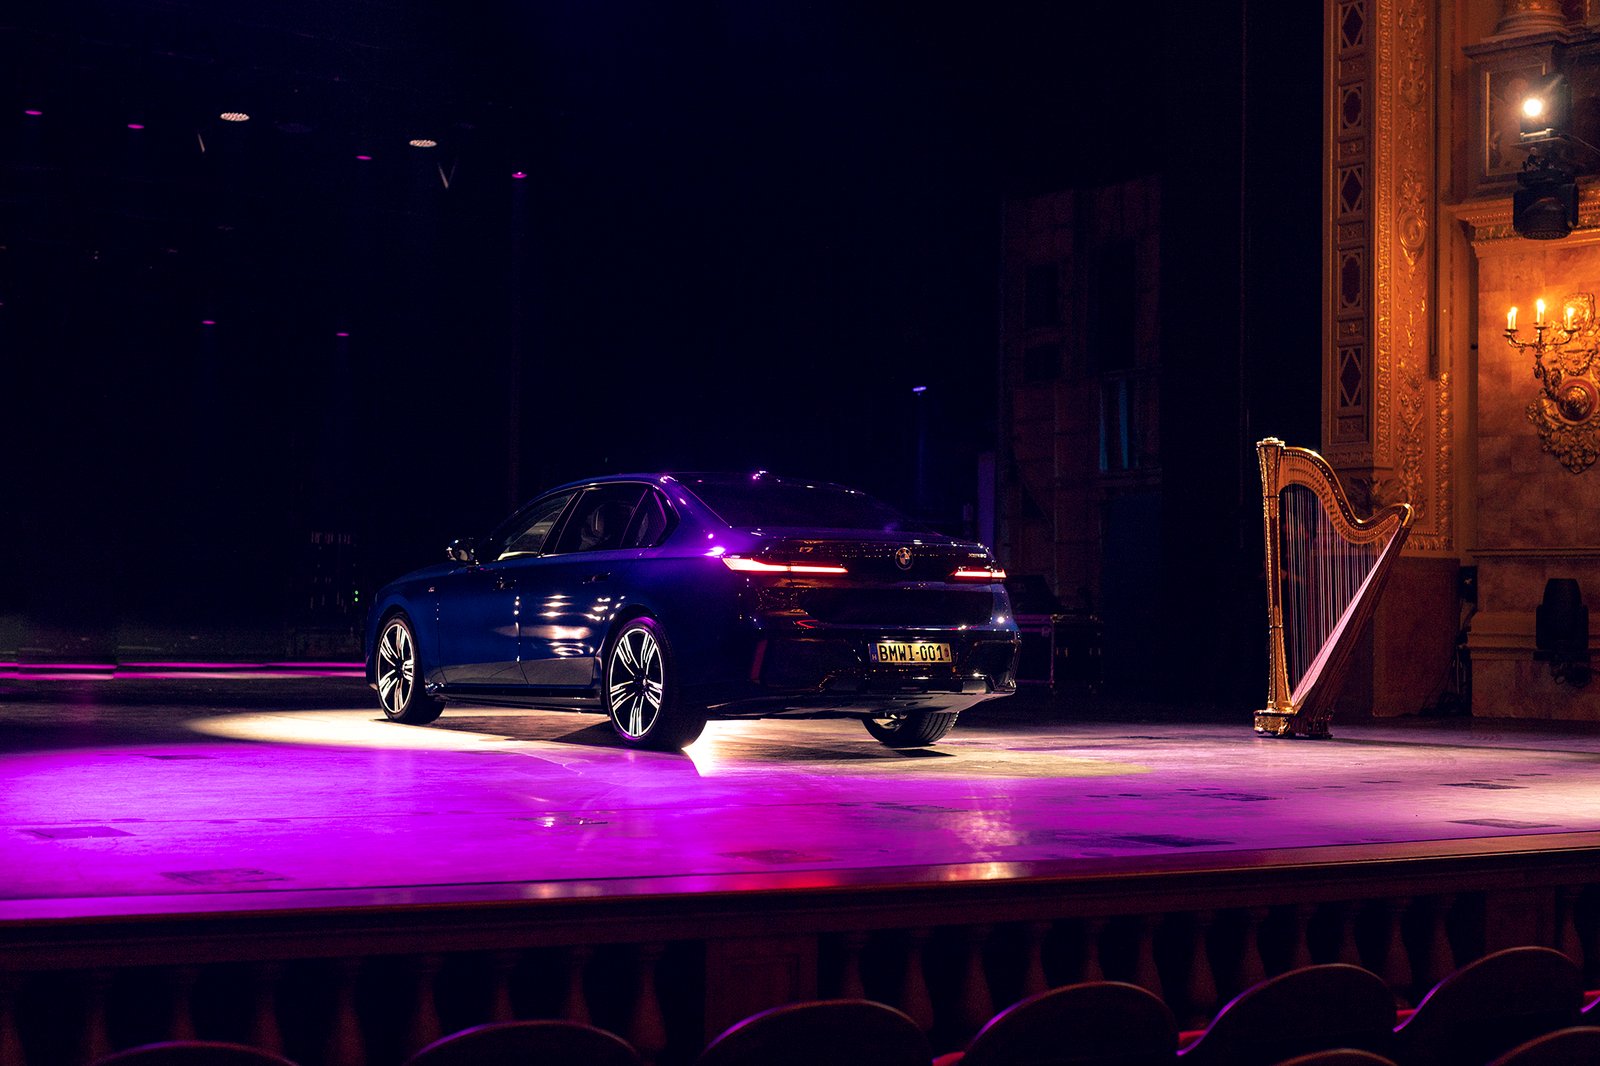 BMW i7 in the spotlight, exclusive photo session at the Opera House in Budapest.